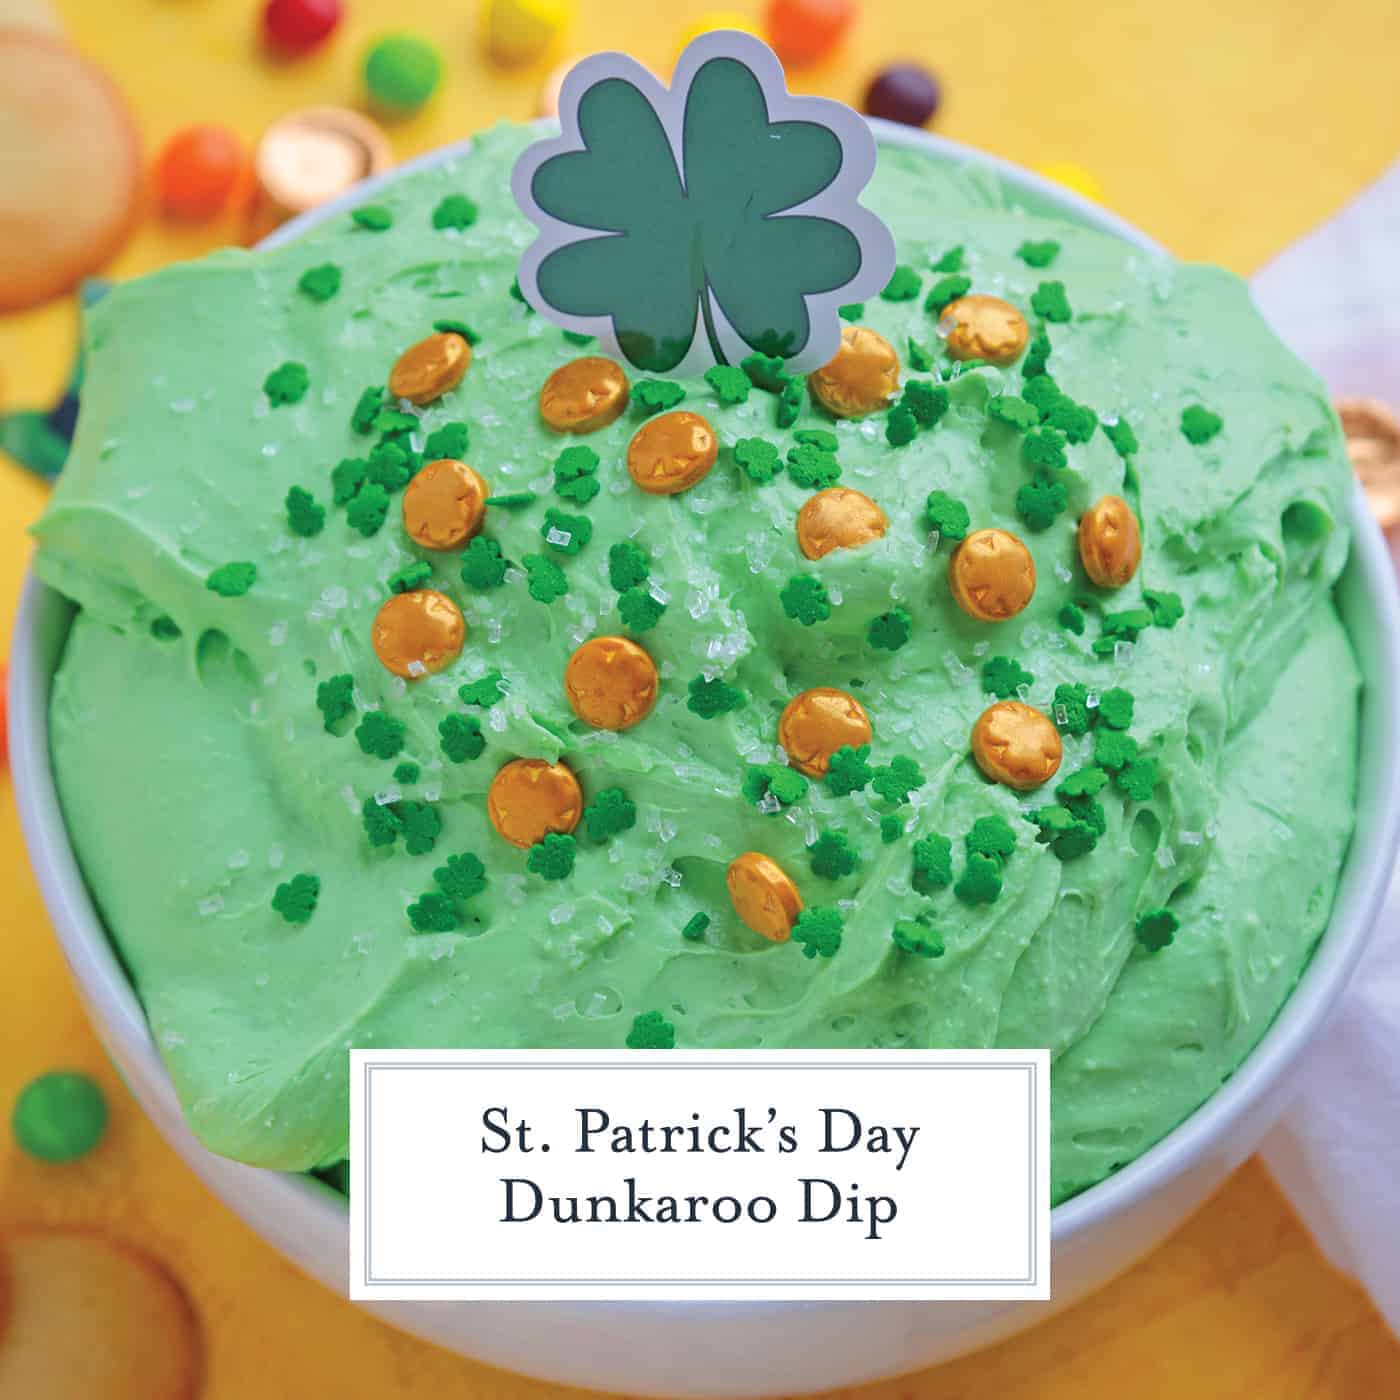 St. Patrick's Day Dunkaroo Dip is a festive green color and served with Nilla Wafers, perfect for any St. Patrick's Day party for kids or adults. #stpatricksday #dunkaroodip www.savoryexperiments.com 